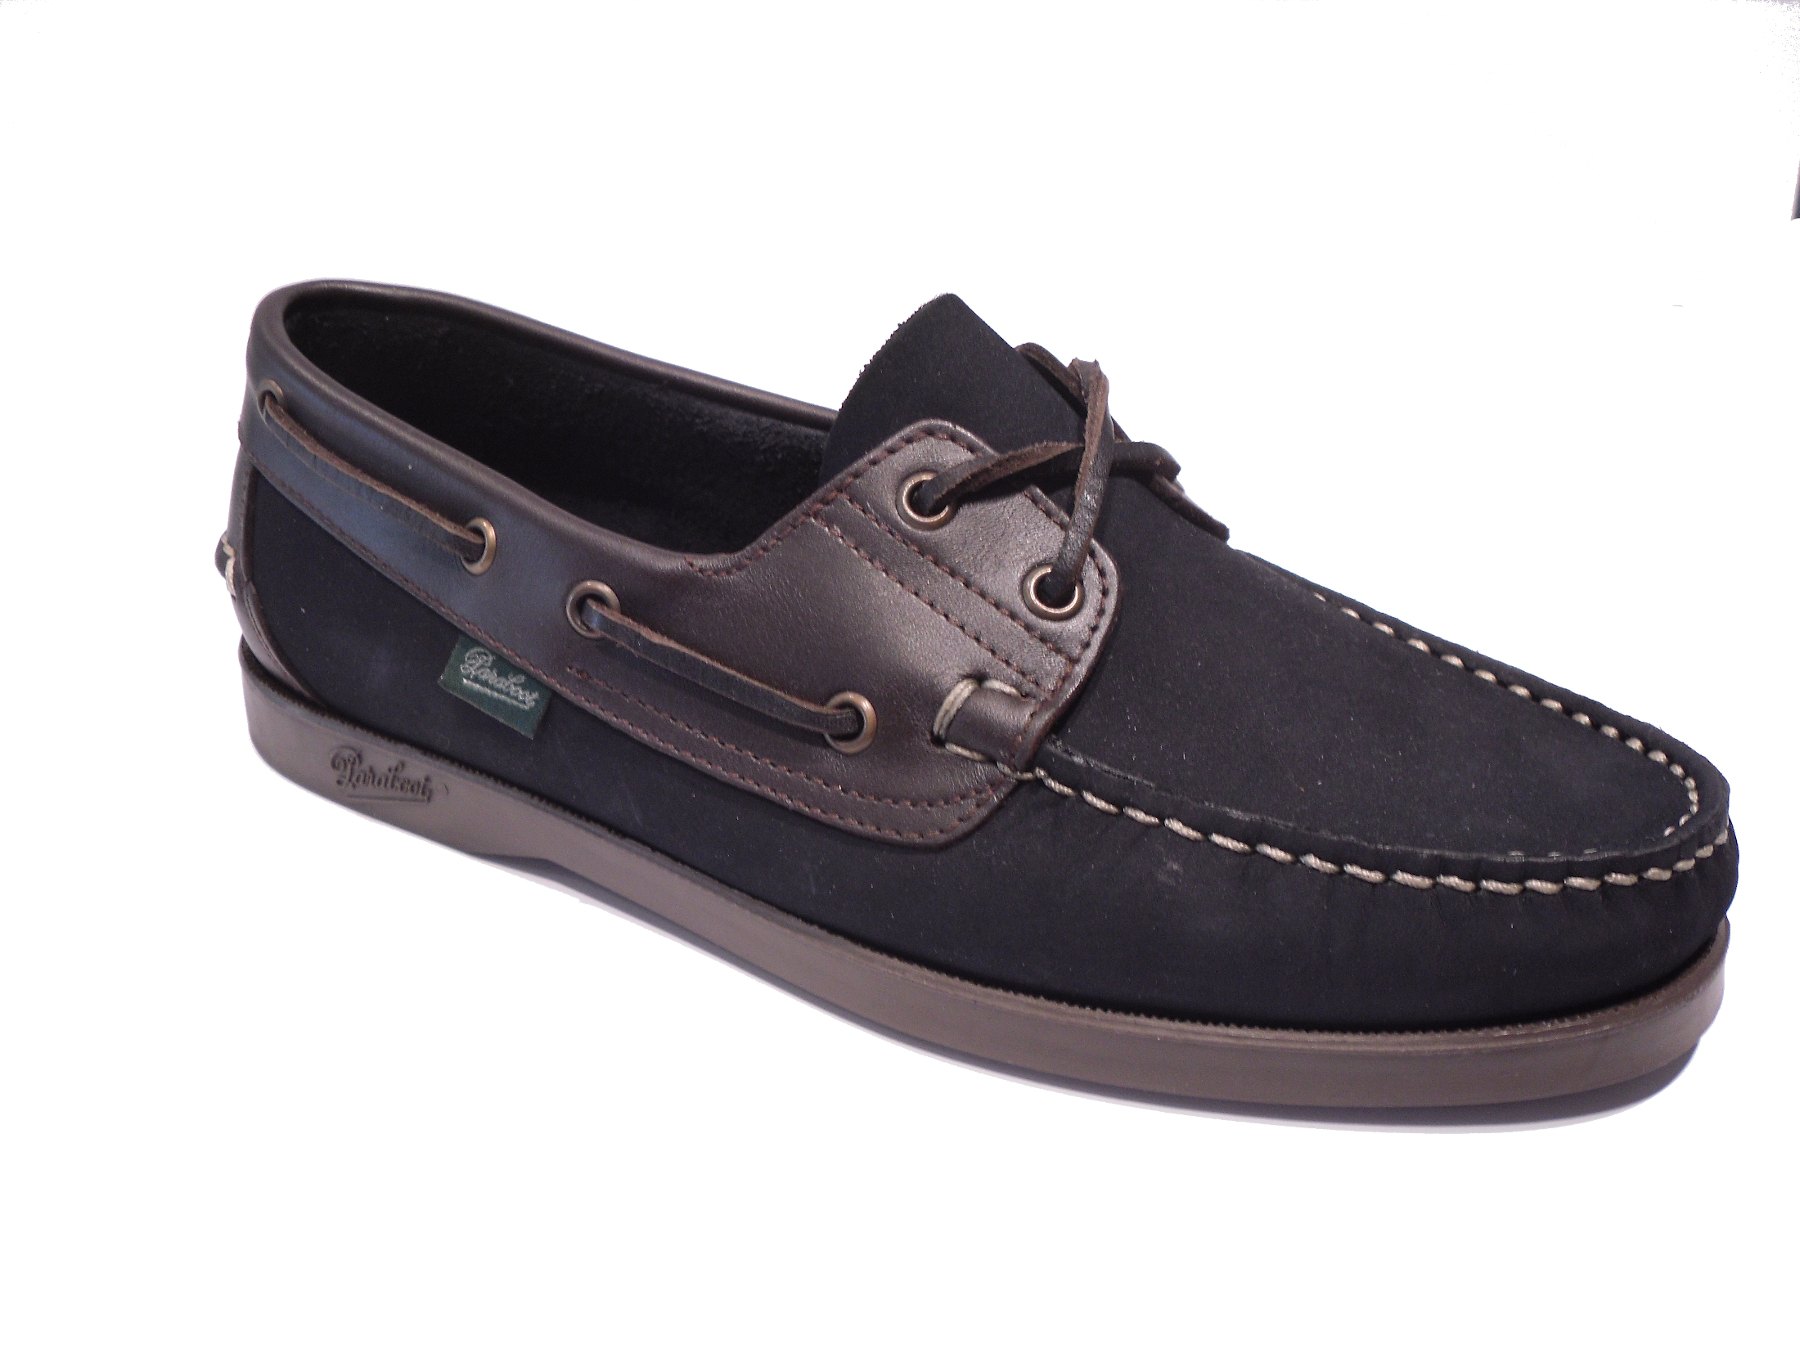 CHAUSSURE PARABOOT ARLES 703813 CAFE